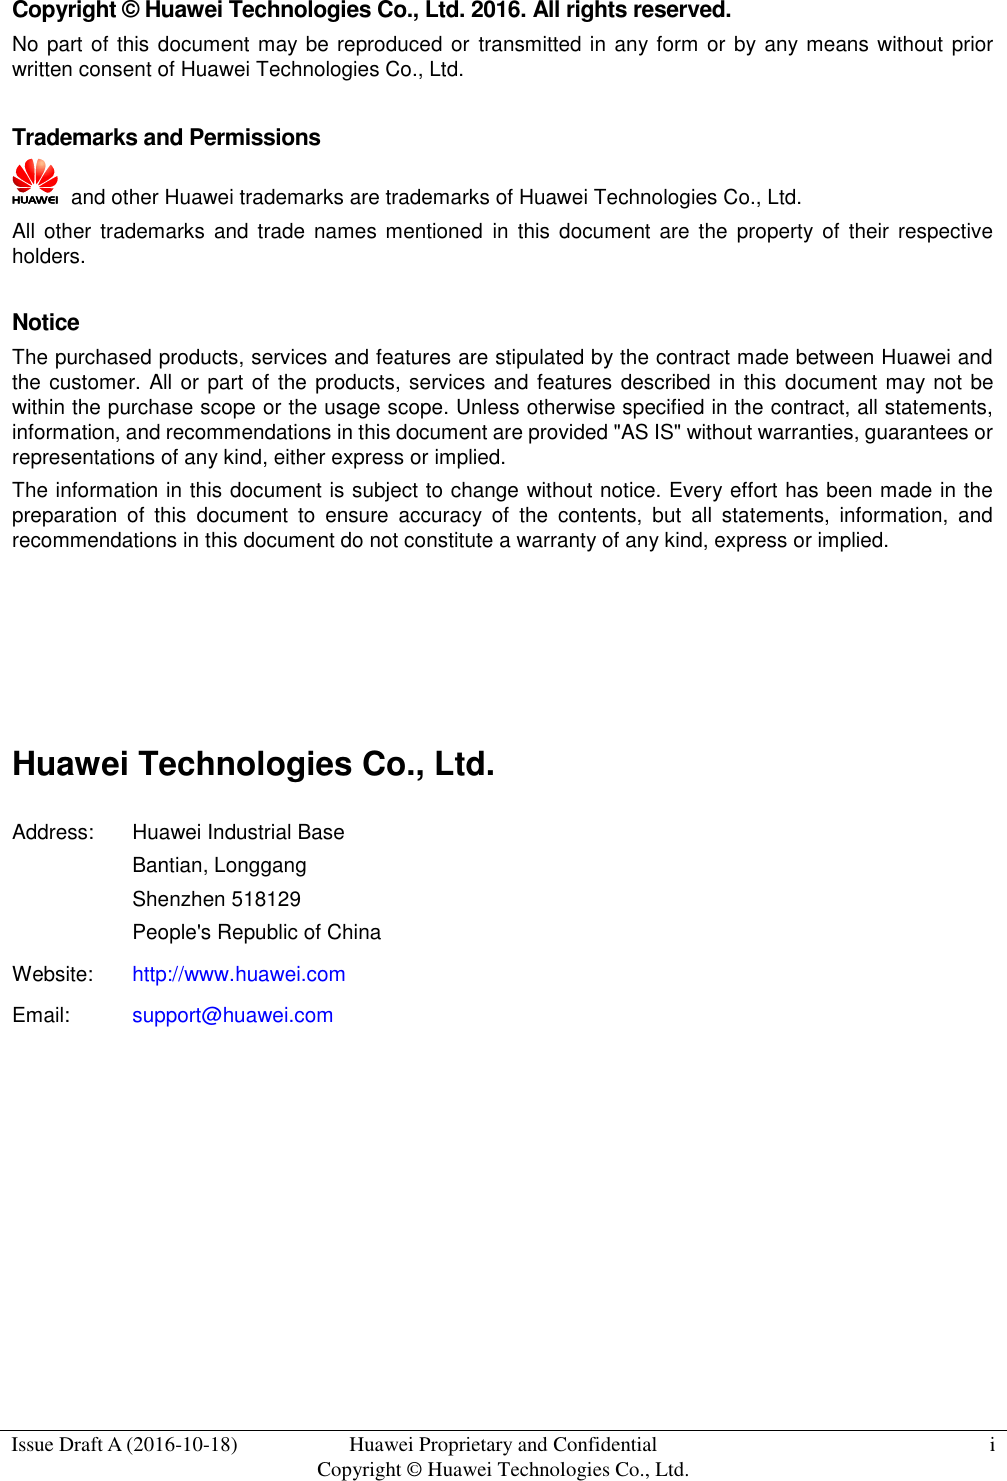  Issue Draft A (2016-10-18) Huawei Proprietary and Confidential                                     Copyright ©  Huawei Technologies Co., Ltd. i    Copyright ©  Huawei Technologies Co., Ltd. 2016. All rights reserved. No part of this document may  be reproduced or  transmitted in any form  or by any means without prior written consent of Huawei Technologies Co., Ltd.  Trademarks and Permissions   and other Huawei trademarks are trademarks of Huawei Technologies Co., Ltd. All other  trademarks  and trade names  mentioned  in  this document  are  the  property  of  their  respective holders.  Notice The purchased products, services and features are stipulated by the contract made between Huawei and the customer.  All or part of the products, services and features  described in this document may not be within the purchase scope or the usage scope. Unless otherwise specified in the contract, all statements, information, and recommendations in this document are provided &quot;AS IS&quot; without warranties, guarantees or representations of any kind, either express or implied. The information in this document is subject to change without notice. Every effort has been made in the preparation  of  this  document  to  ensure  accuracy  of  the  contents,  but  all  statements,  information,  and recommendations in this document do not constitute a warranty of any kind, express or implied.     Huawei Technologies Co., Ltd. Address: Huawei Industrial Base Bantian, Longgang Shenzhen 518129 People&apos;s Republic of China Website: http://www.huawei.com Email: support@huawei.com          